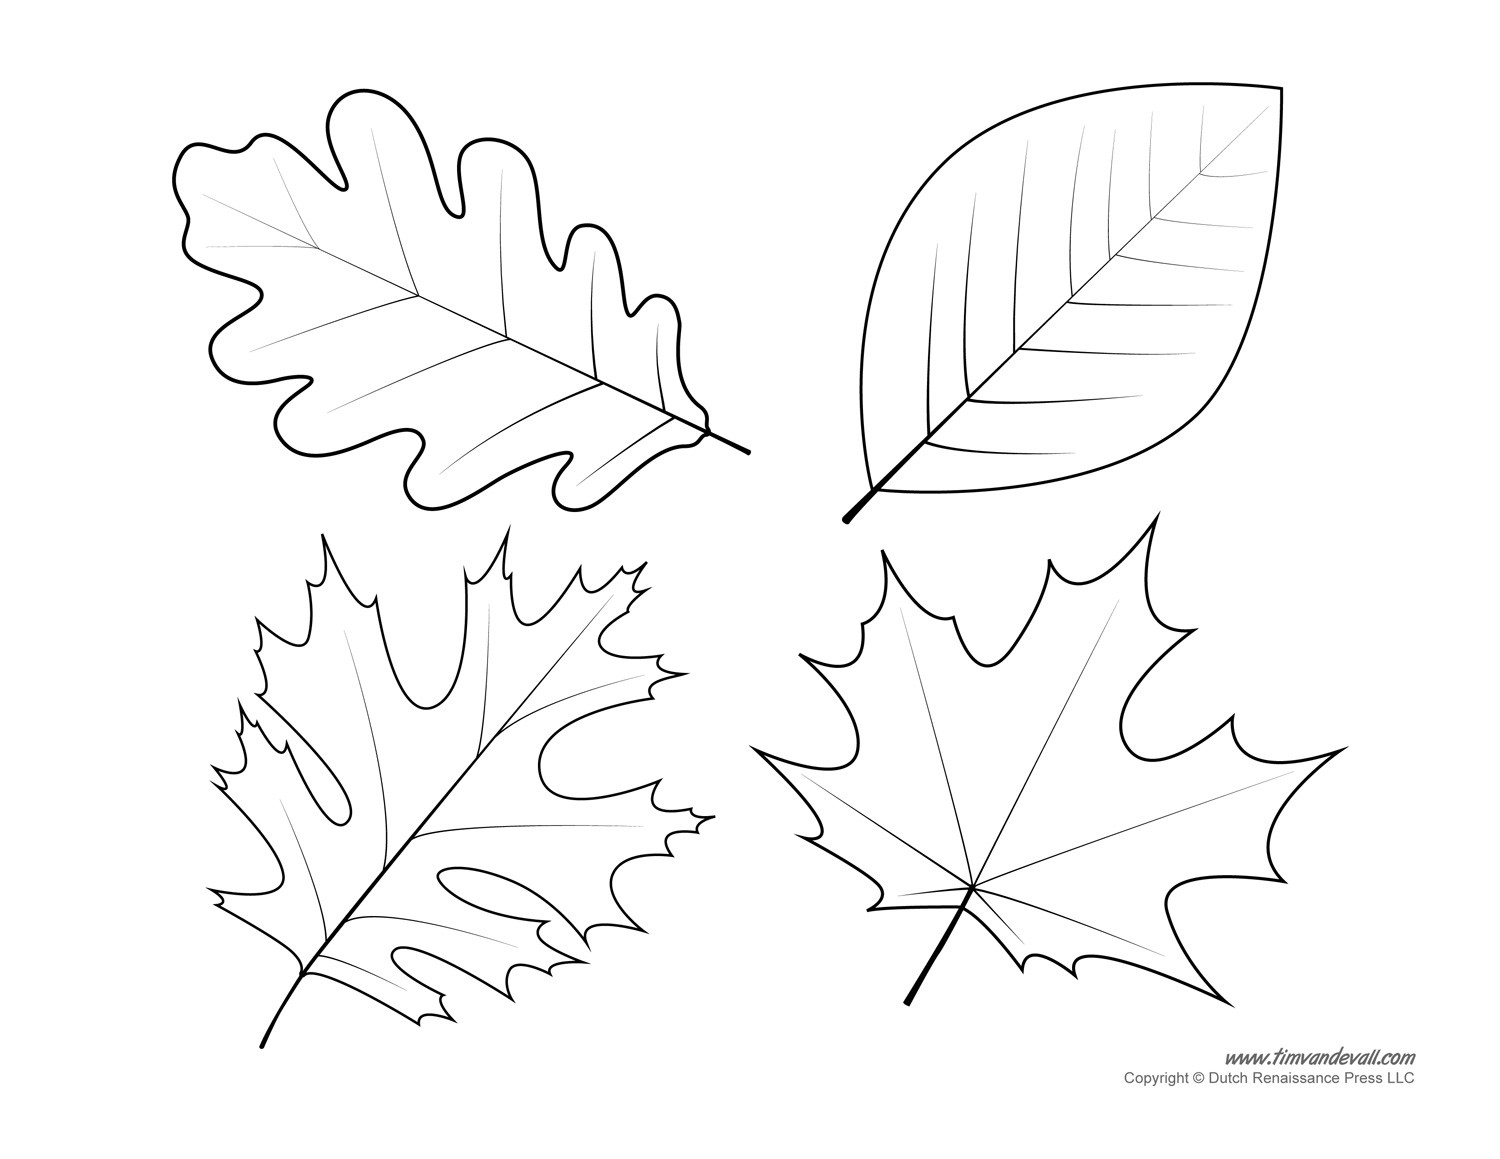 Printable Leaves Coloring Pages
 Leaf Templates & Leaf Coloring Pages for Kids